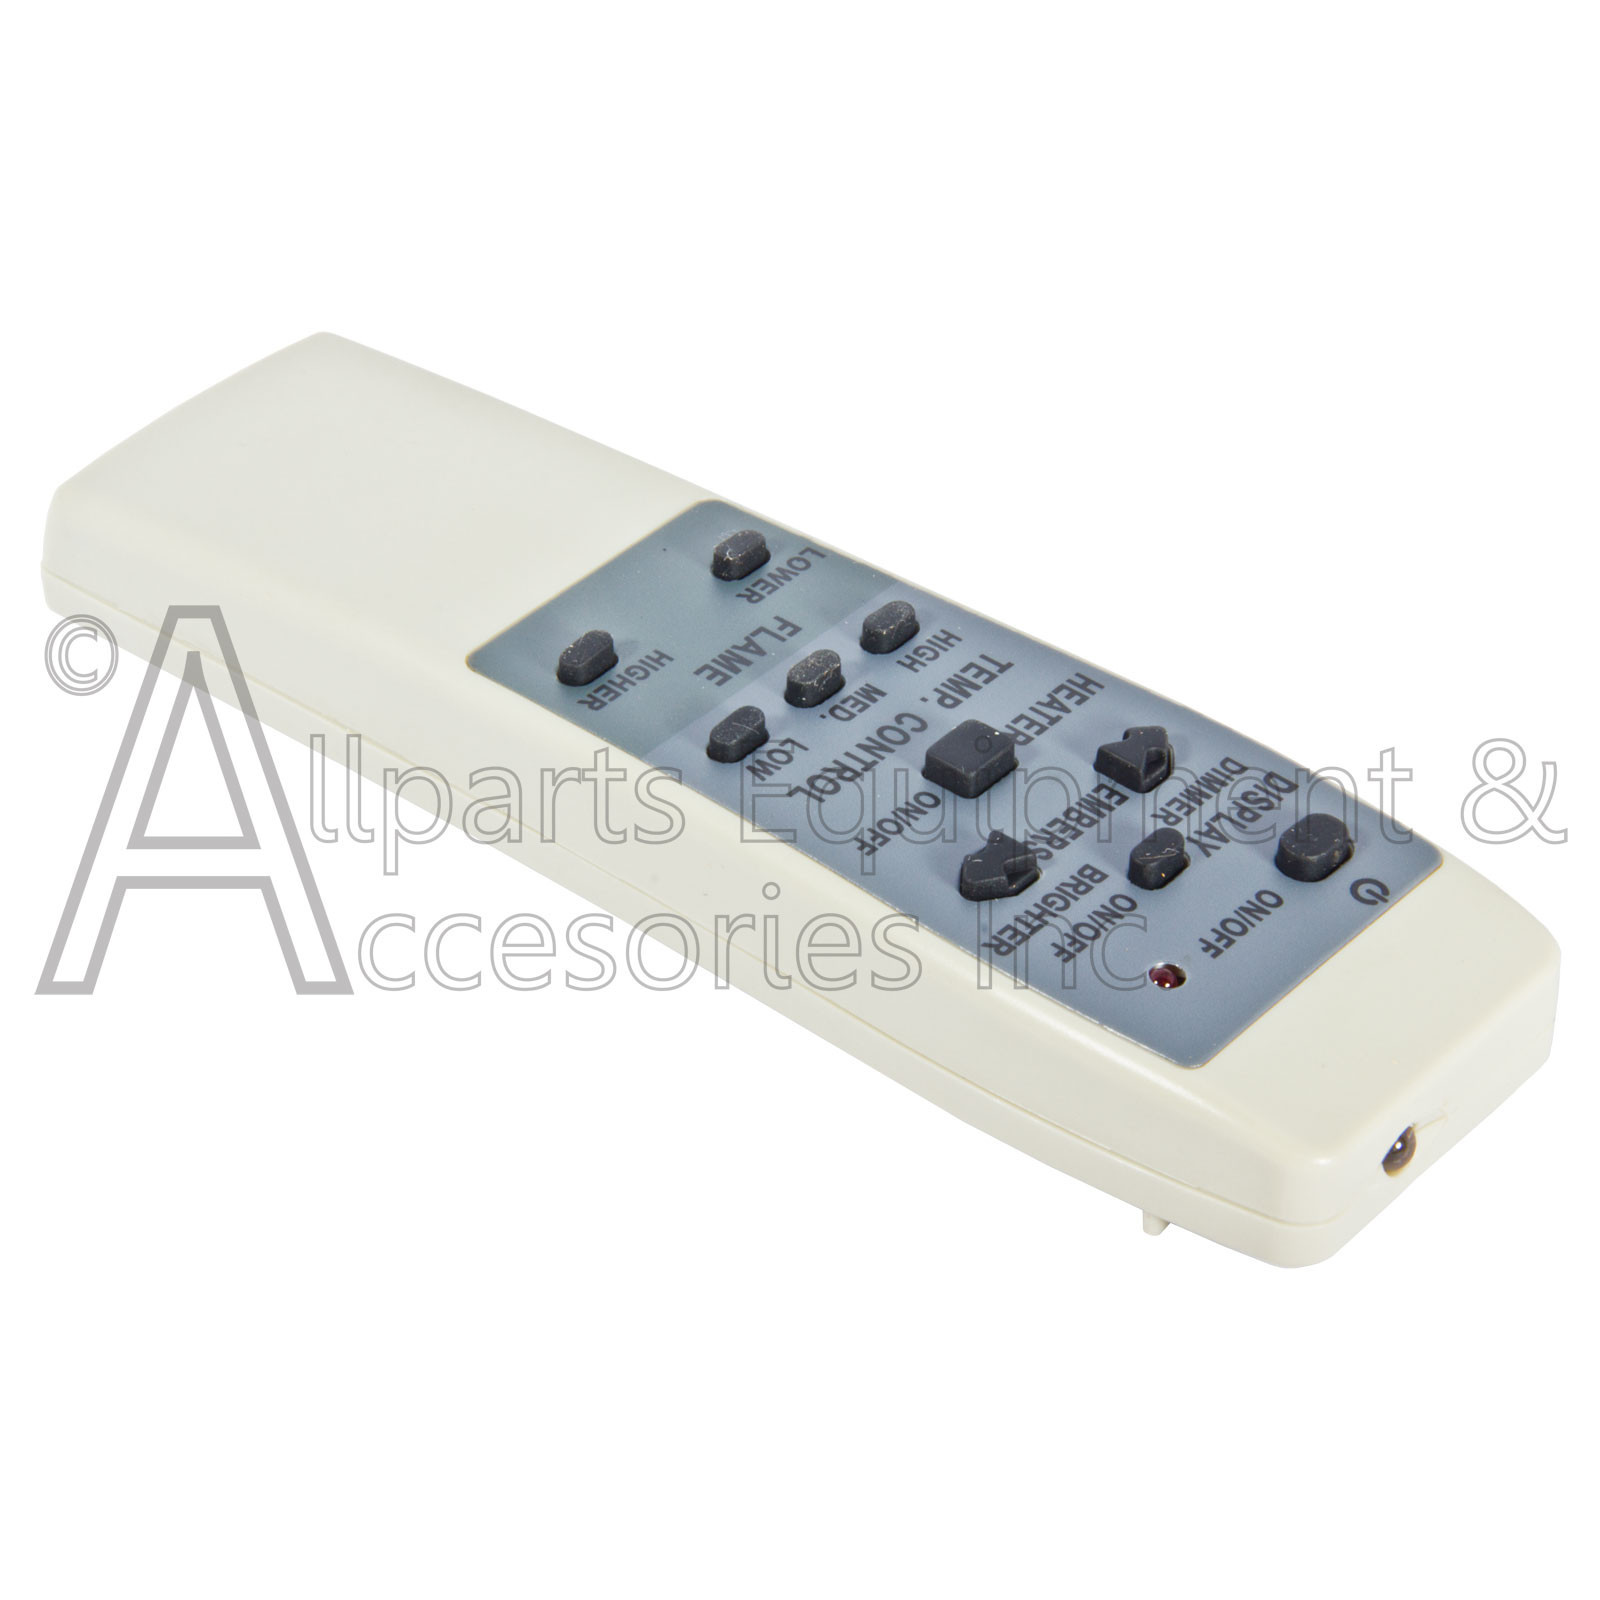 Electric Fireplace Remote Controls
 Lennox H1644 Remote Control for Electric Fireplace